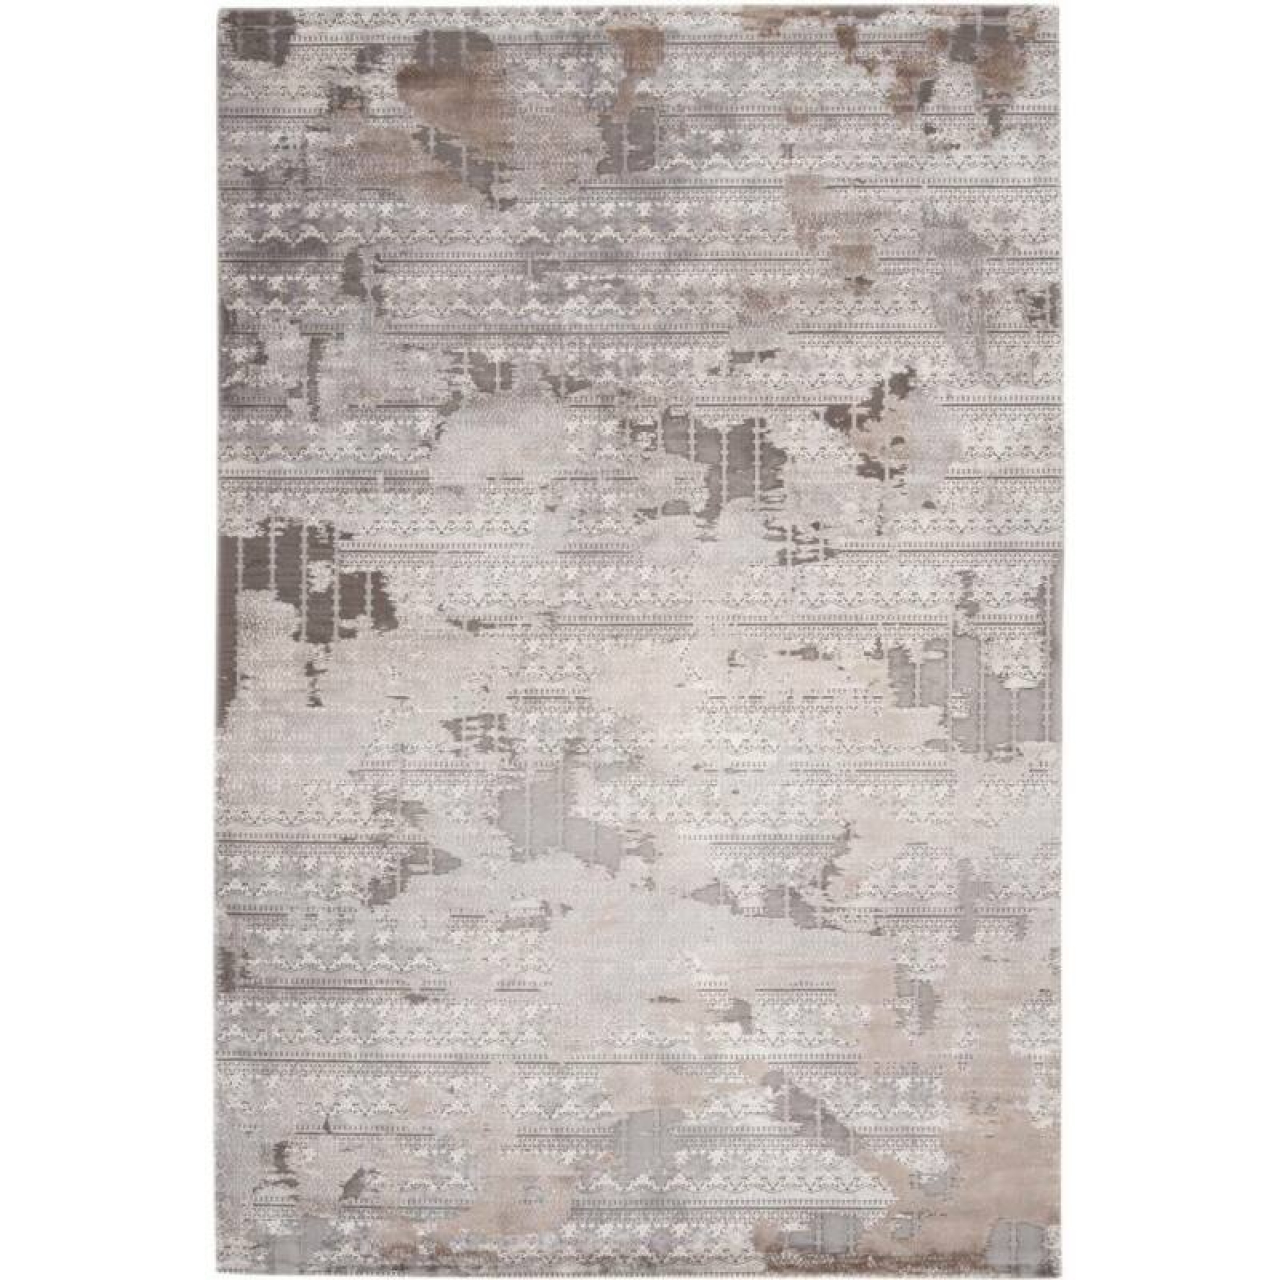 Obsession Haute Couture Jewel 955 Taupe szőnyeg-240x340